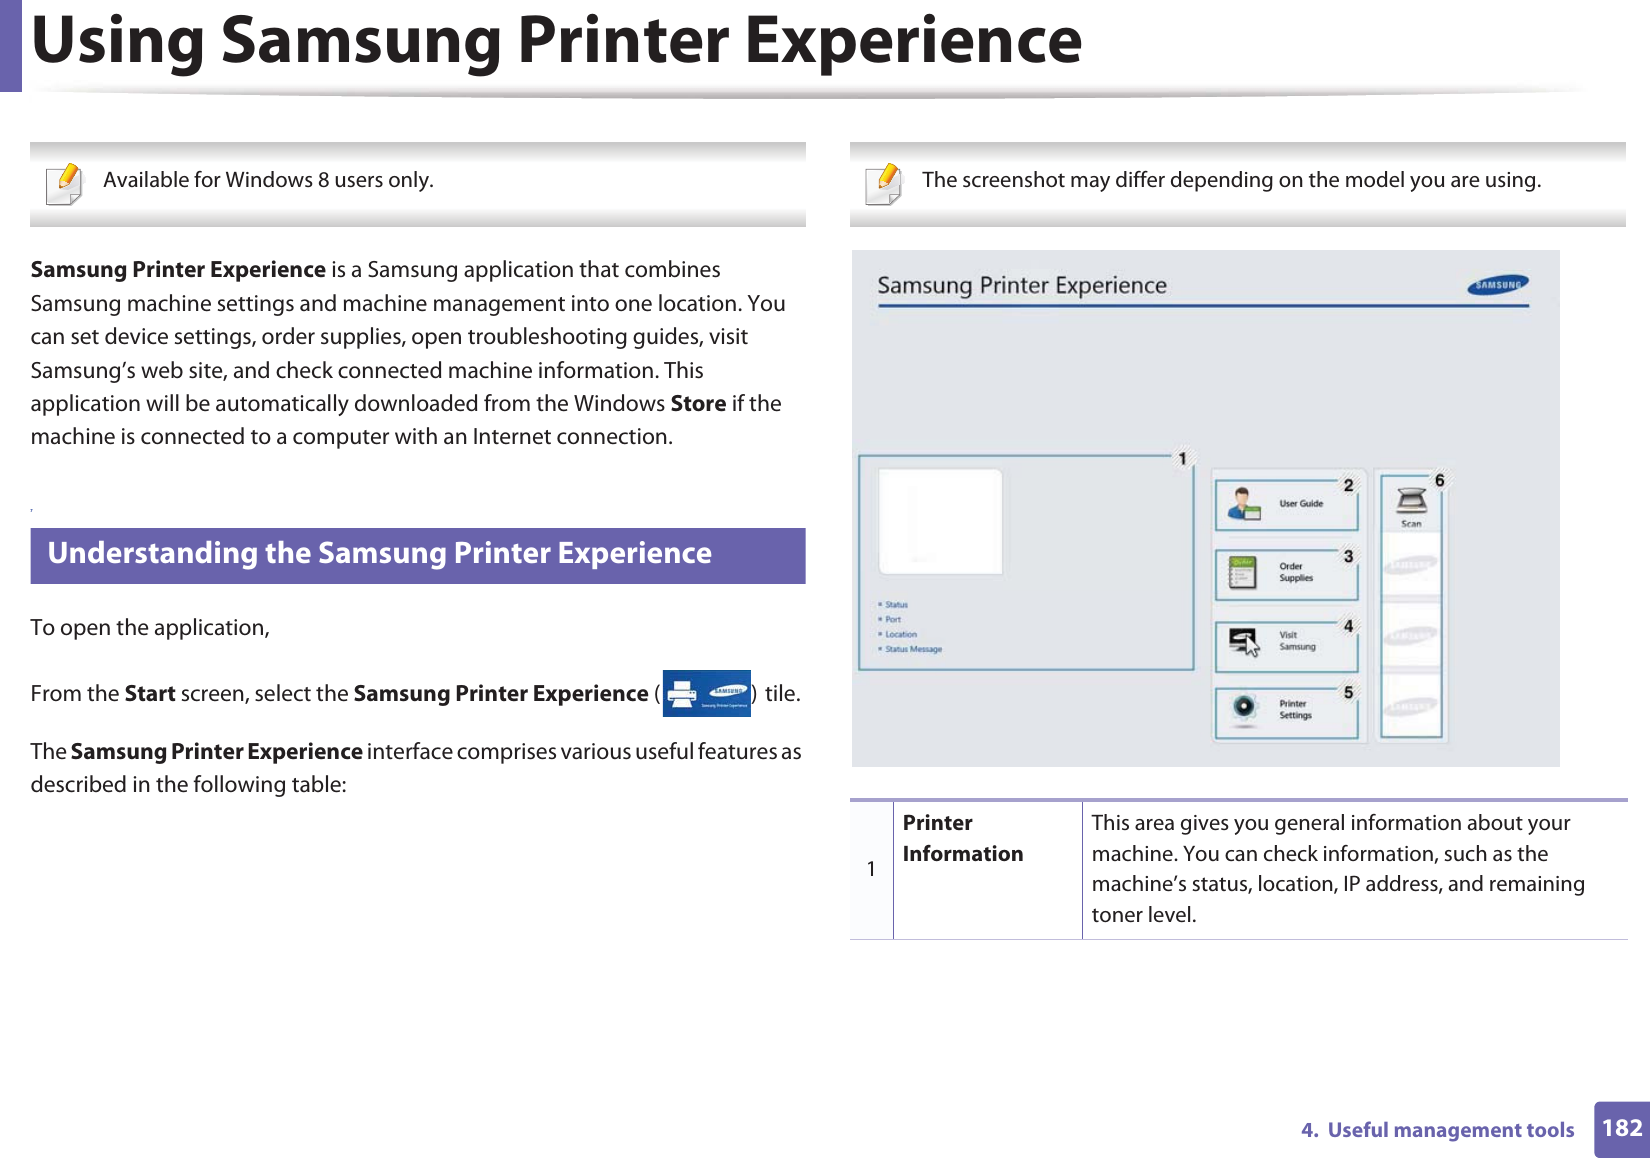 1824.  Useful management toolsUsing Samsung Printer Experience Available for Windows 8 users only. Samsung Printer Experience is a Samsung application that combines Samsung machine settings and machine management into one location. You can set device settings, order supplies, open troubleshooting guides, visit Samsung’s web site, and check connected machine information. This application will be automatically downloaded from the Windows Store if the machine is connected to a computer with an Internet connection. 7 Understanding the Samsung Printer ExperienceTo open the application, From the Start screen, select the Samsung Printer Experience ()Gtile. The Samsung Printer Experience interface comprises various useful features as described in the following table: The screenshot may differ depending on the model you are using. 1Printer InformationThis area gives you general information about your machine. You can check information, such as the machine’s status, location, IP address, and remaining toner level.